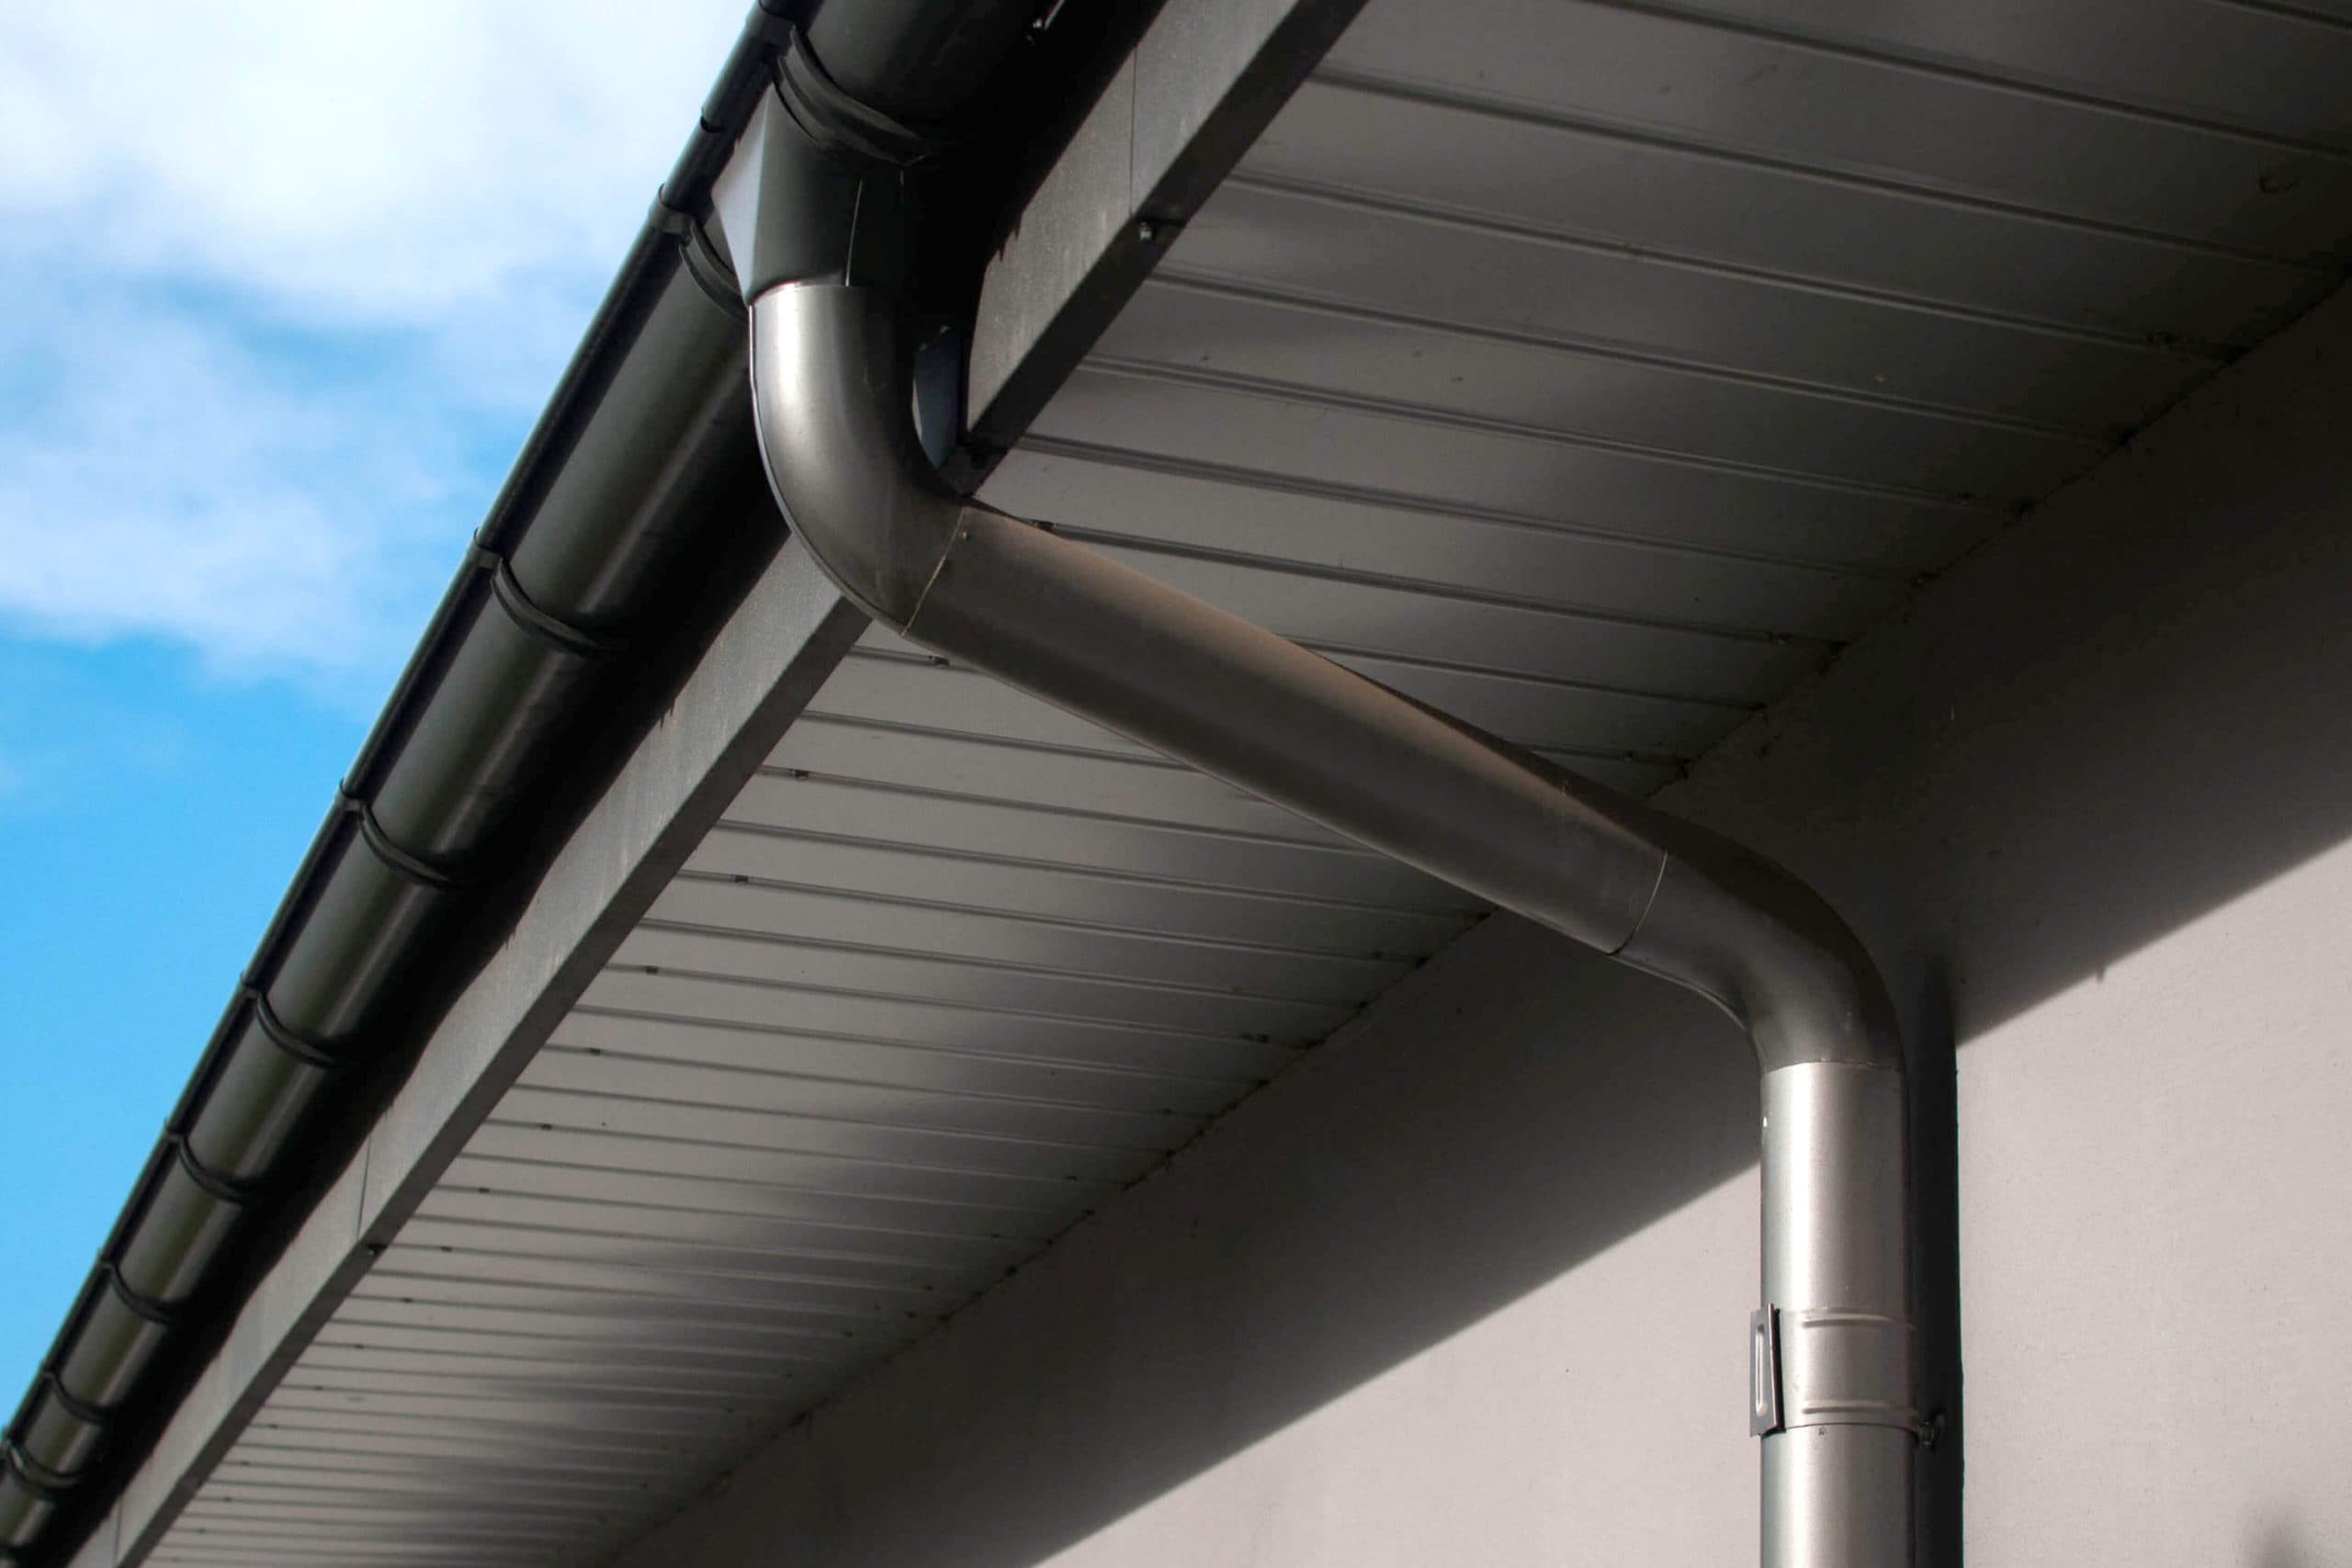 Reliable and affordable Galvanized gutters installation in Birmingham